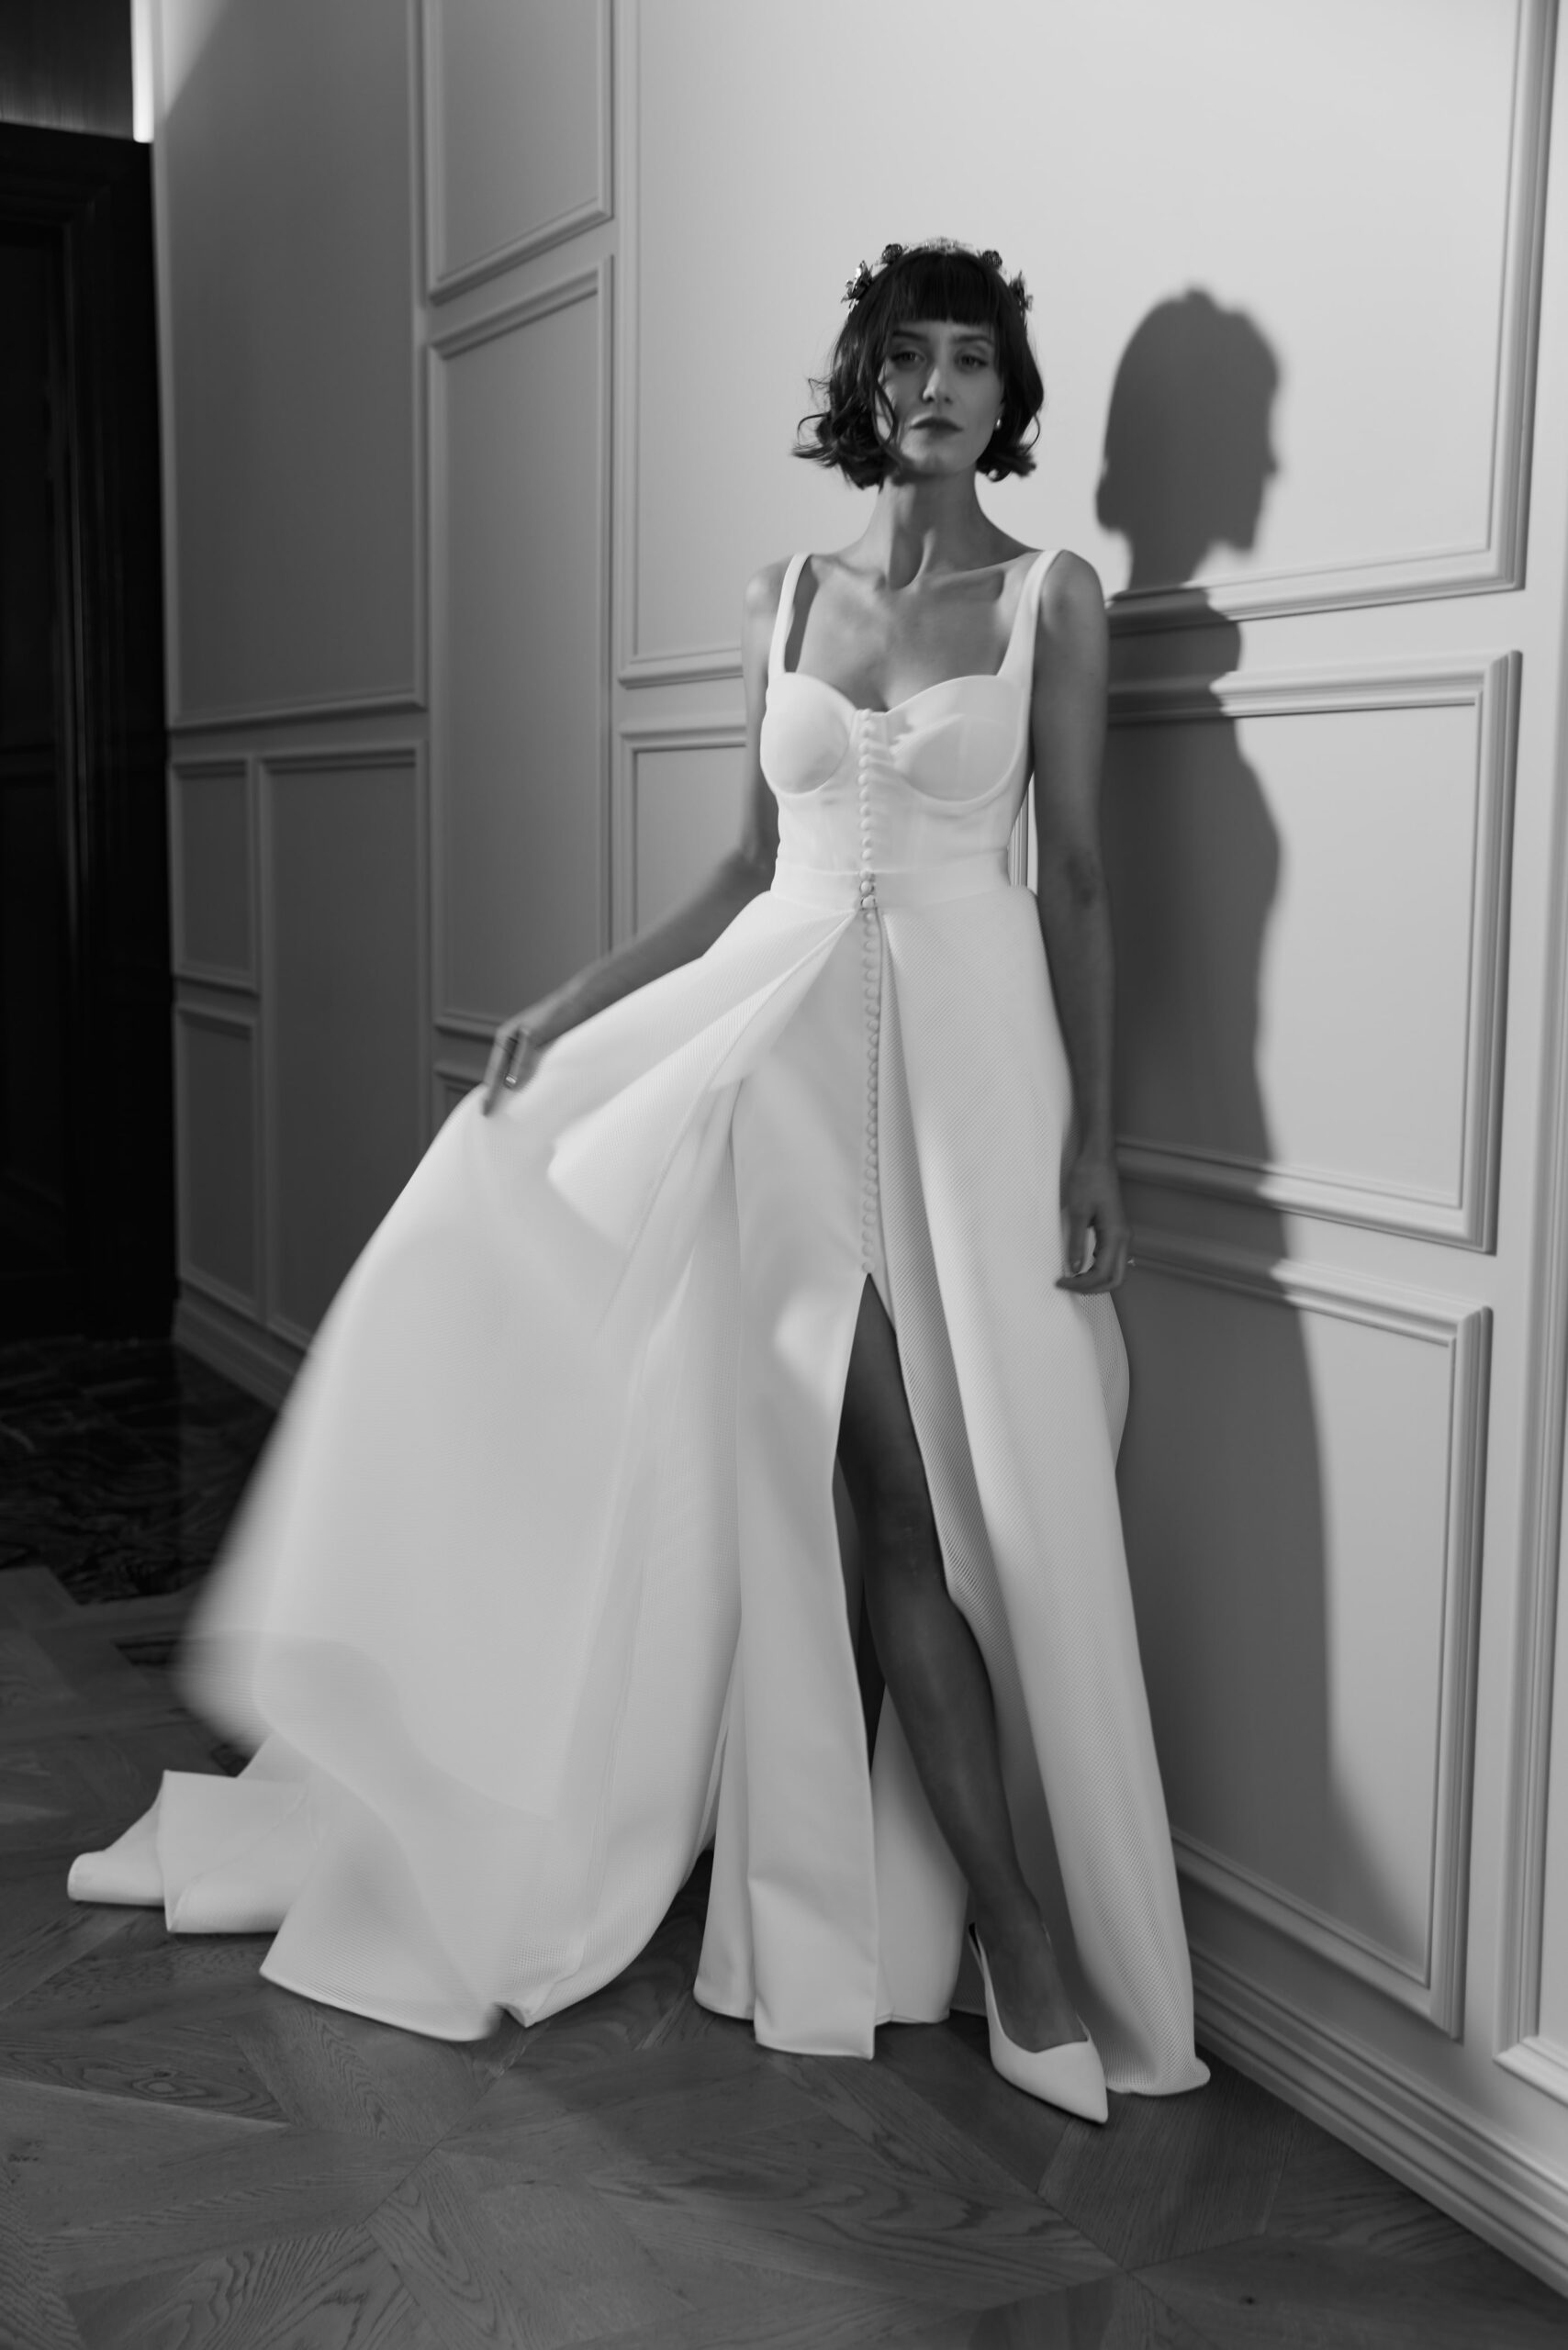 Verana dress and Romana overskirt - a stretch crepe gown with a cup bodice and front button detail worn with a full scuba mesh overskirt.